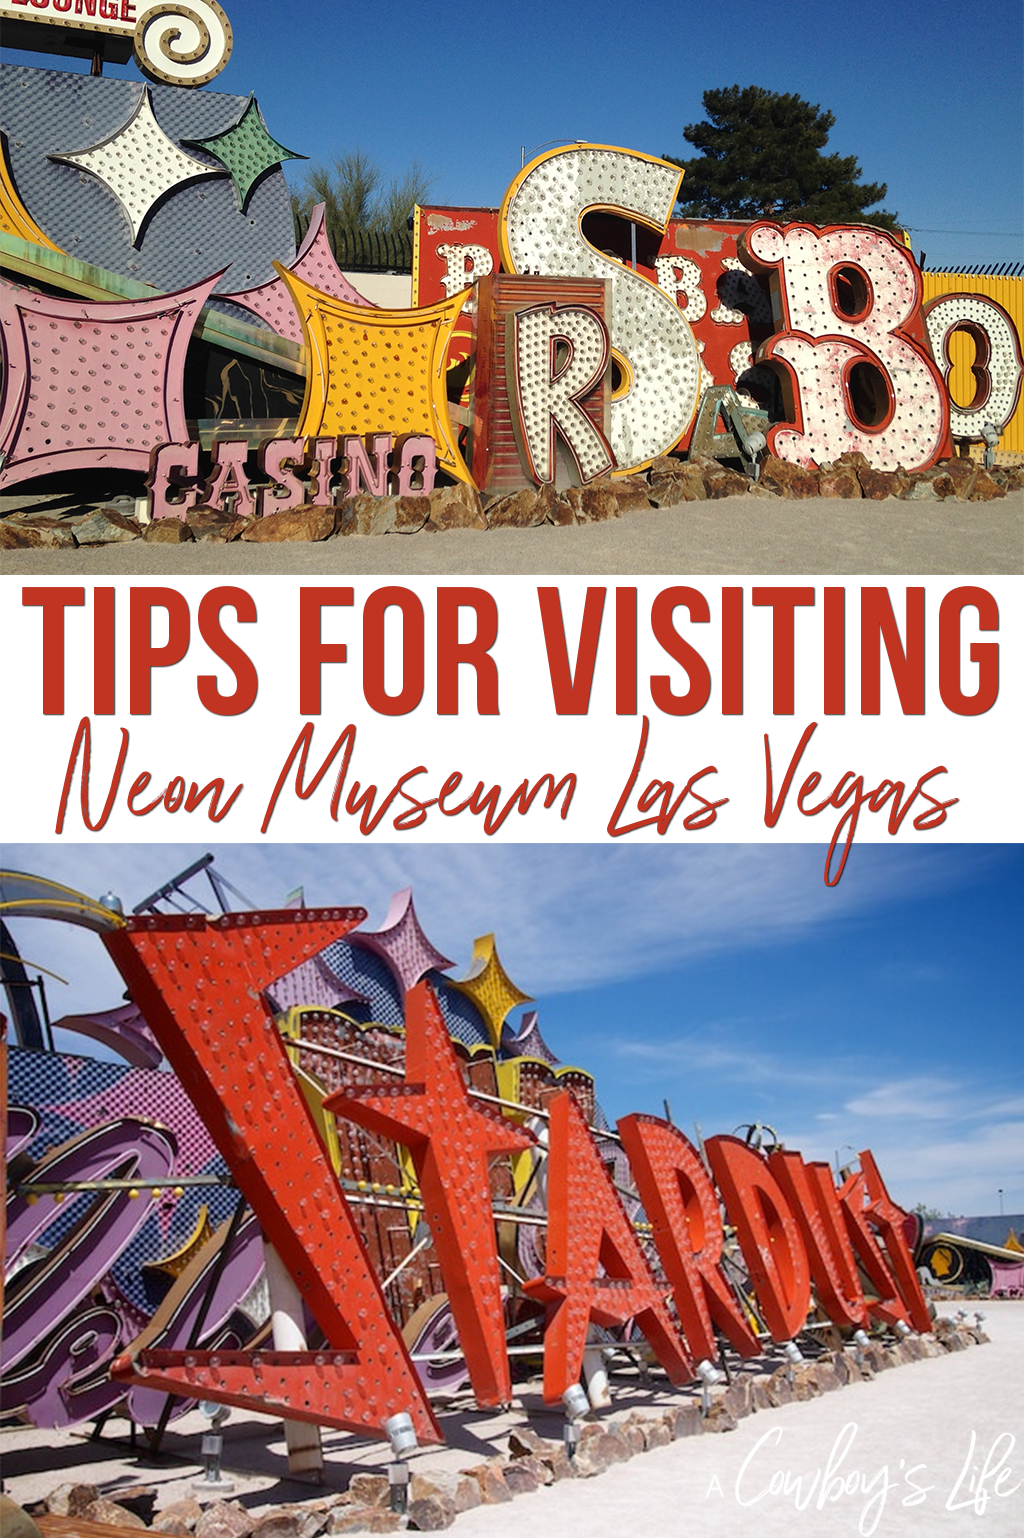 Tips for visiting the Neon Museum in Las Vegas